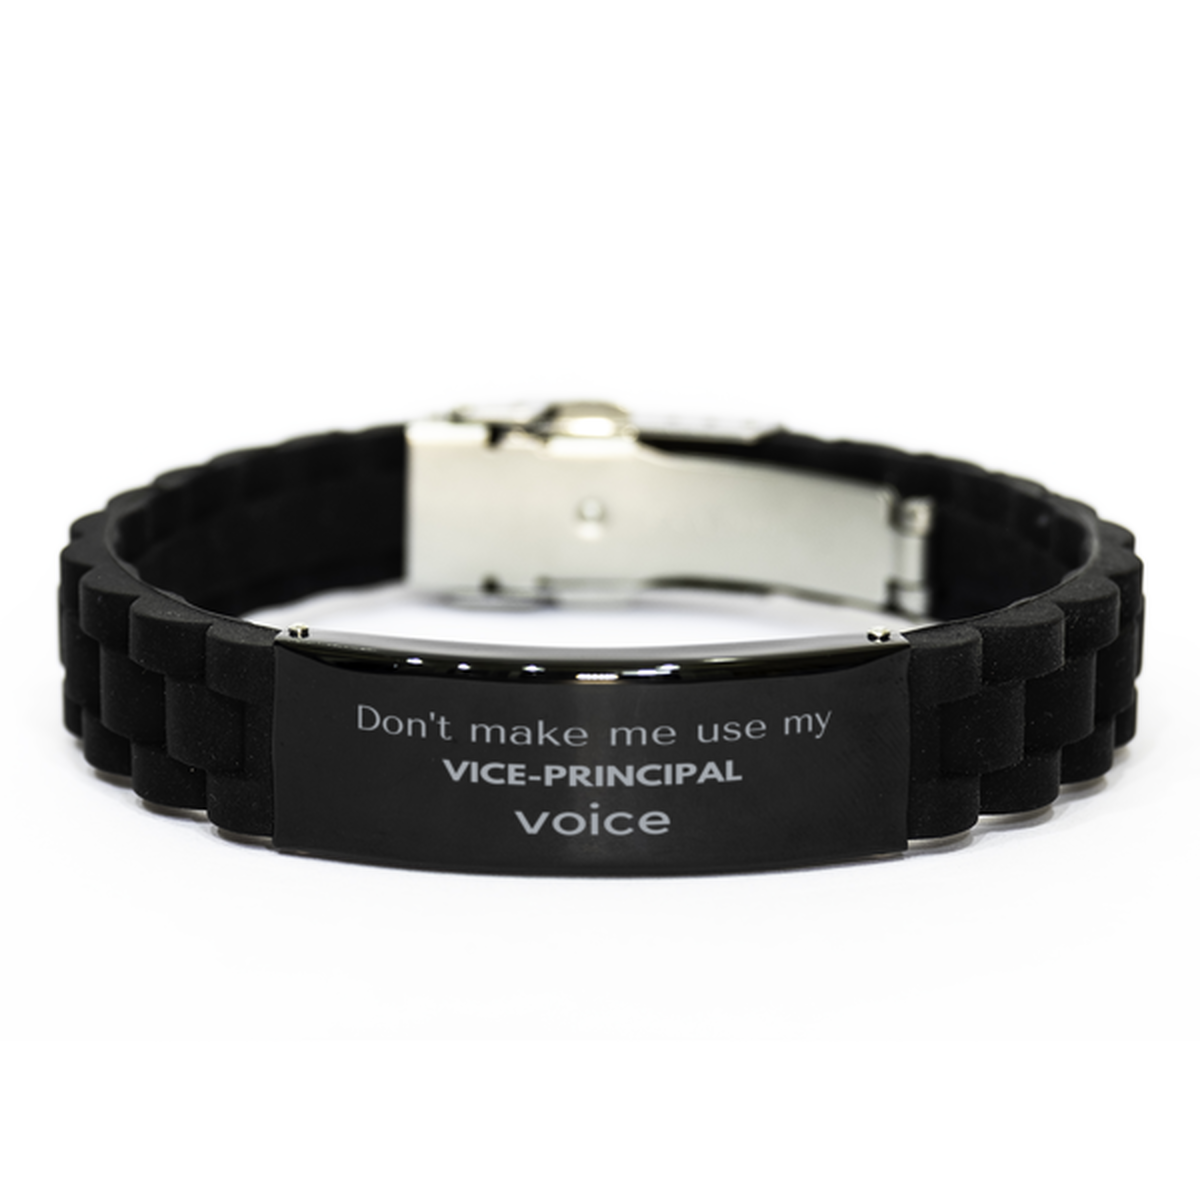 Don't make me use my Vice-principal voice, Sarcasm Vice-principal Gifts, Christmas Vice-principal Black Glidelock Clasp Bracelet Birthday Unique Gifts For Vice-principal Coworkers, Men, Women, Colleague, Friends